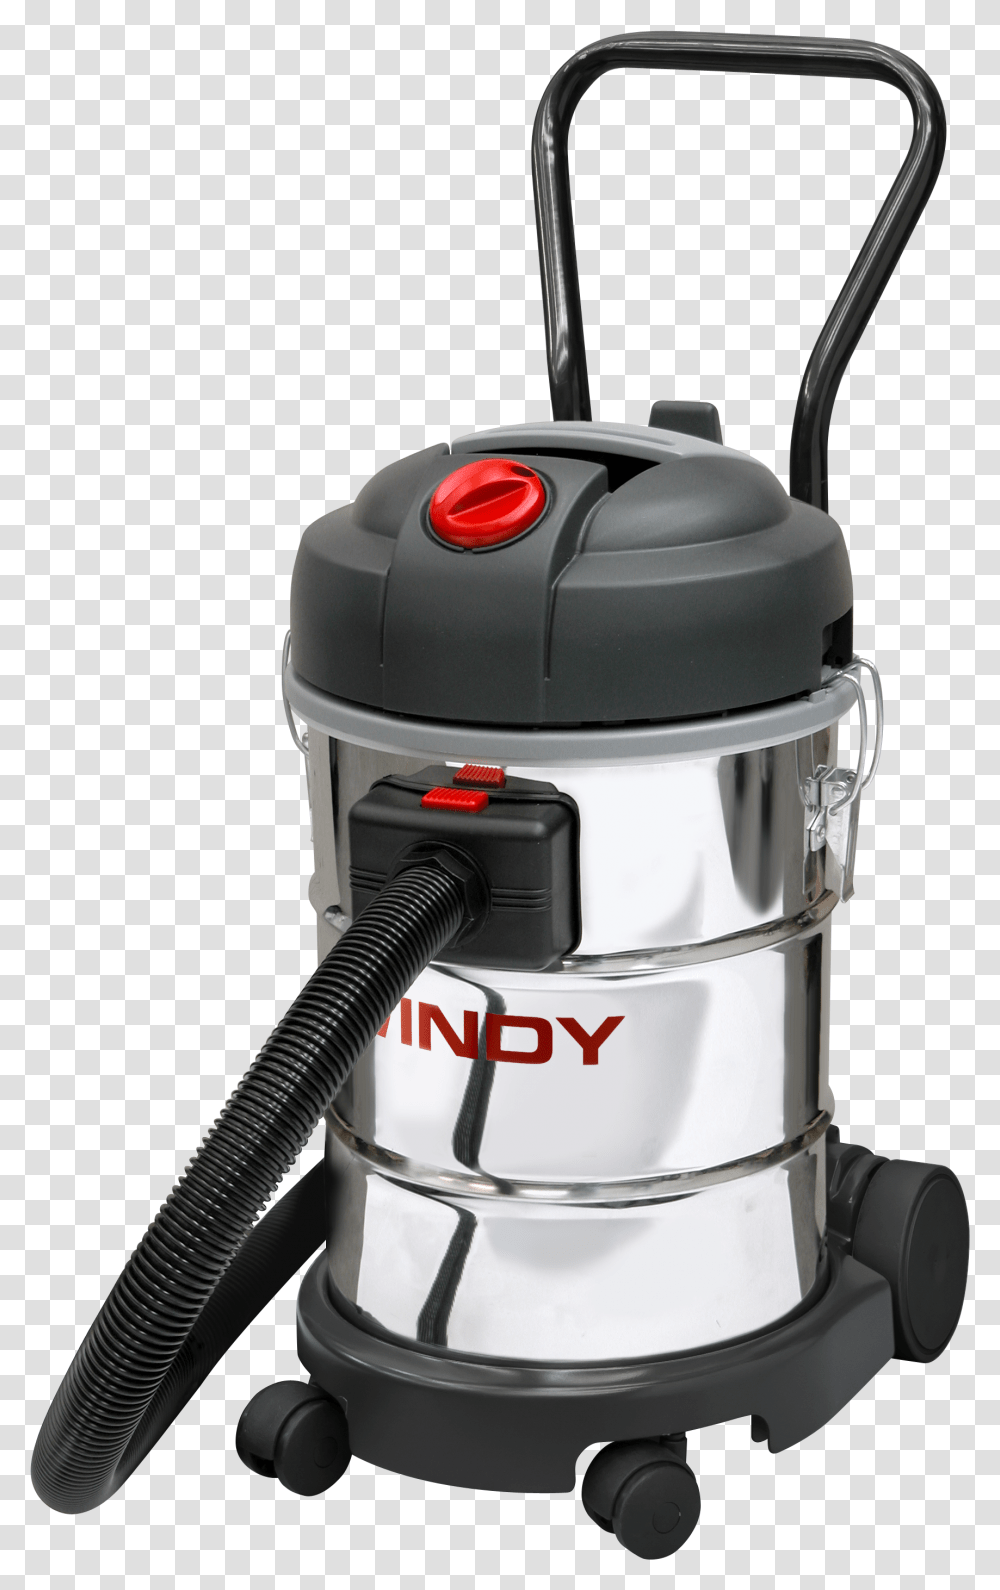 Lavor Windy 130 If Lavor Windy 130 If, Appliance, Mixer, Vacuum Cleaner Transparent Png